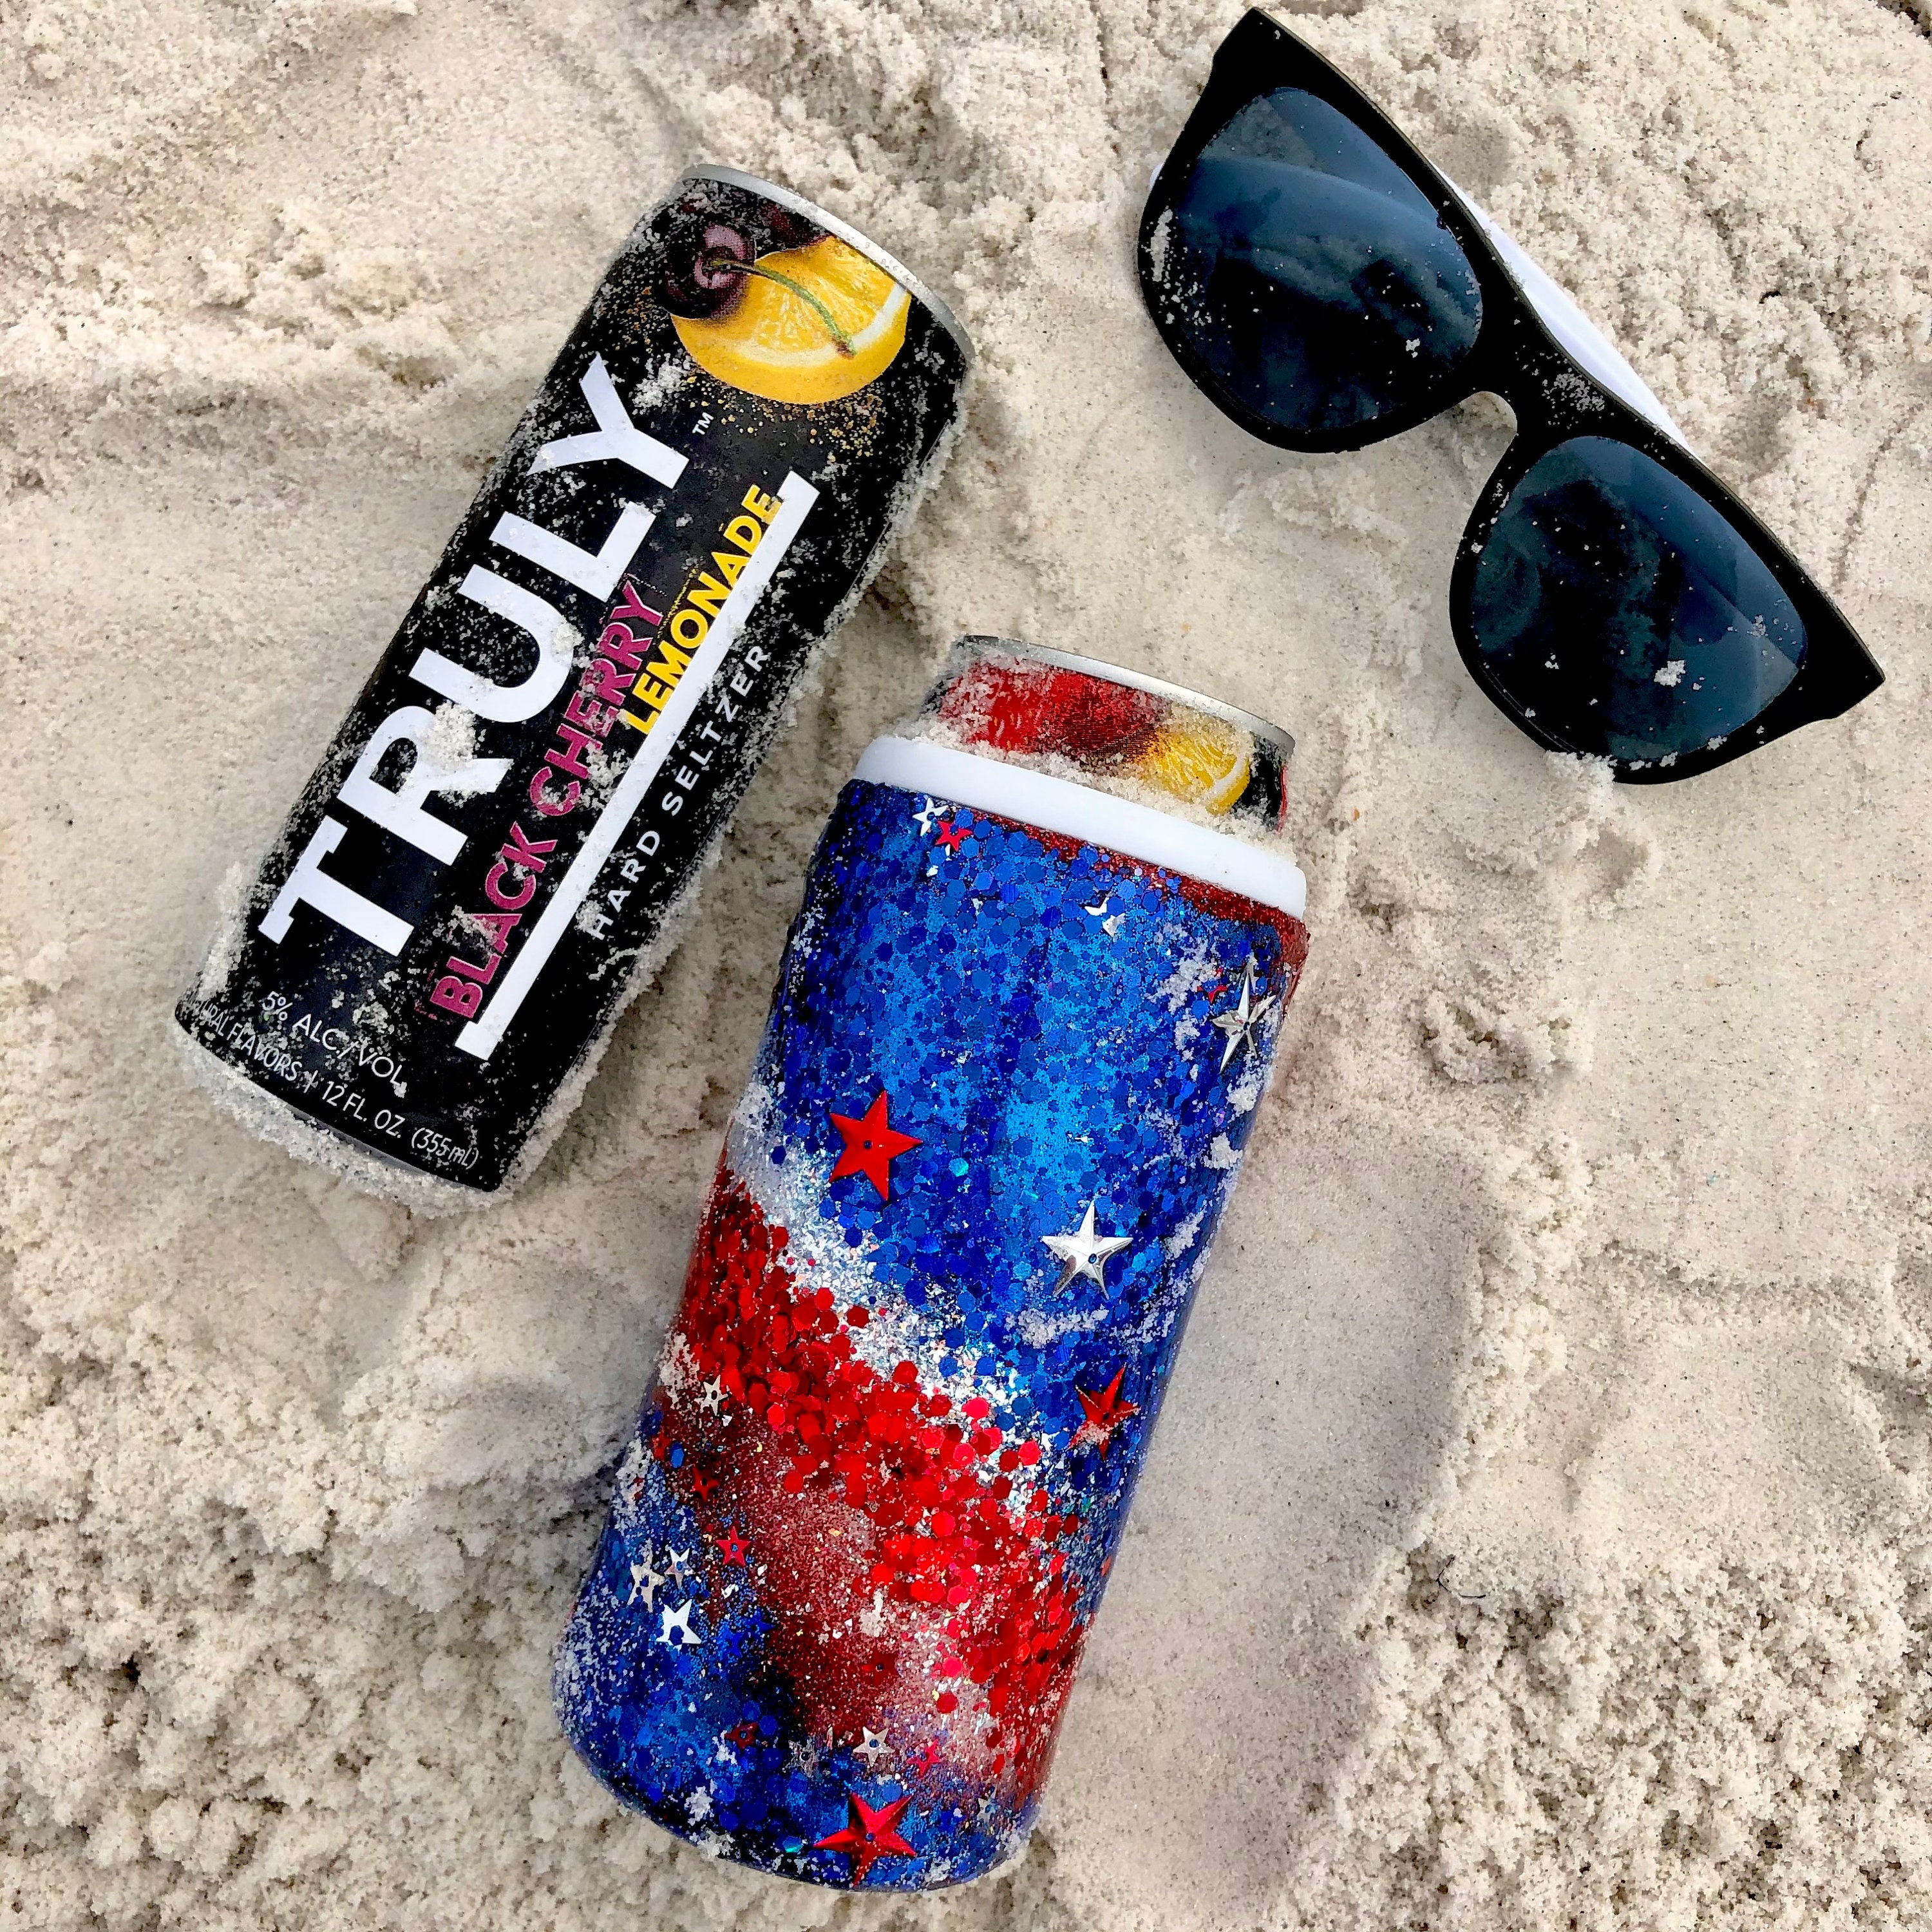 Spiked Seltzer Koozies - Don't exist? Make your own! — Steemit